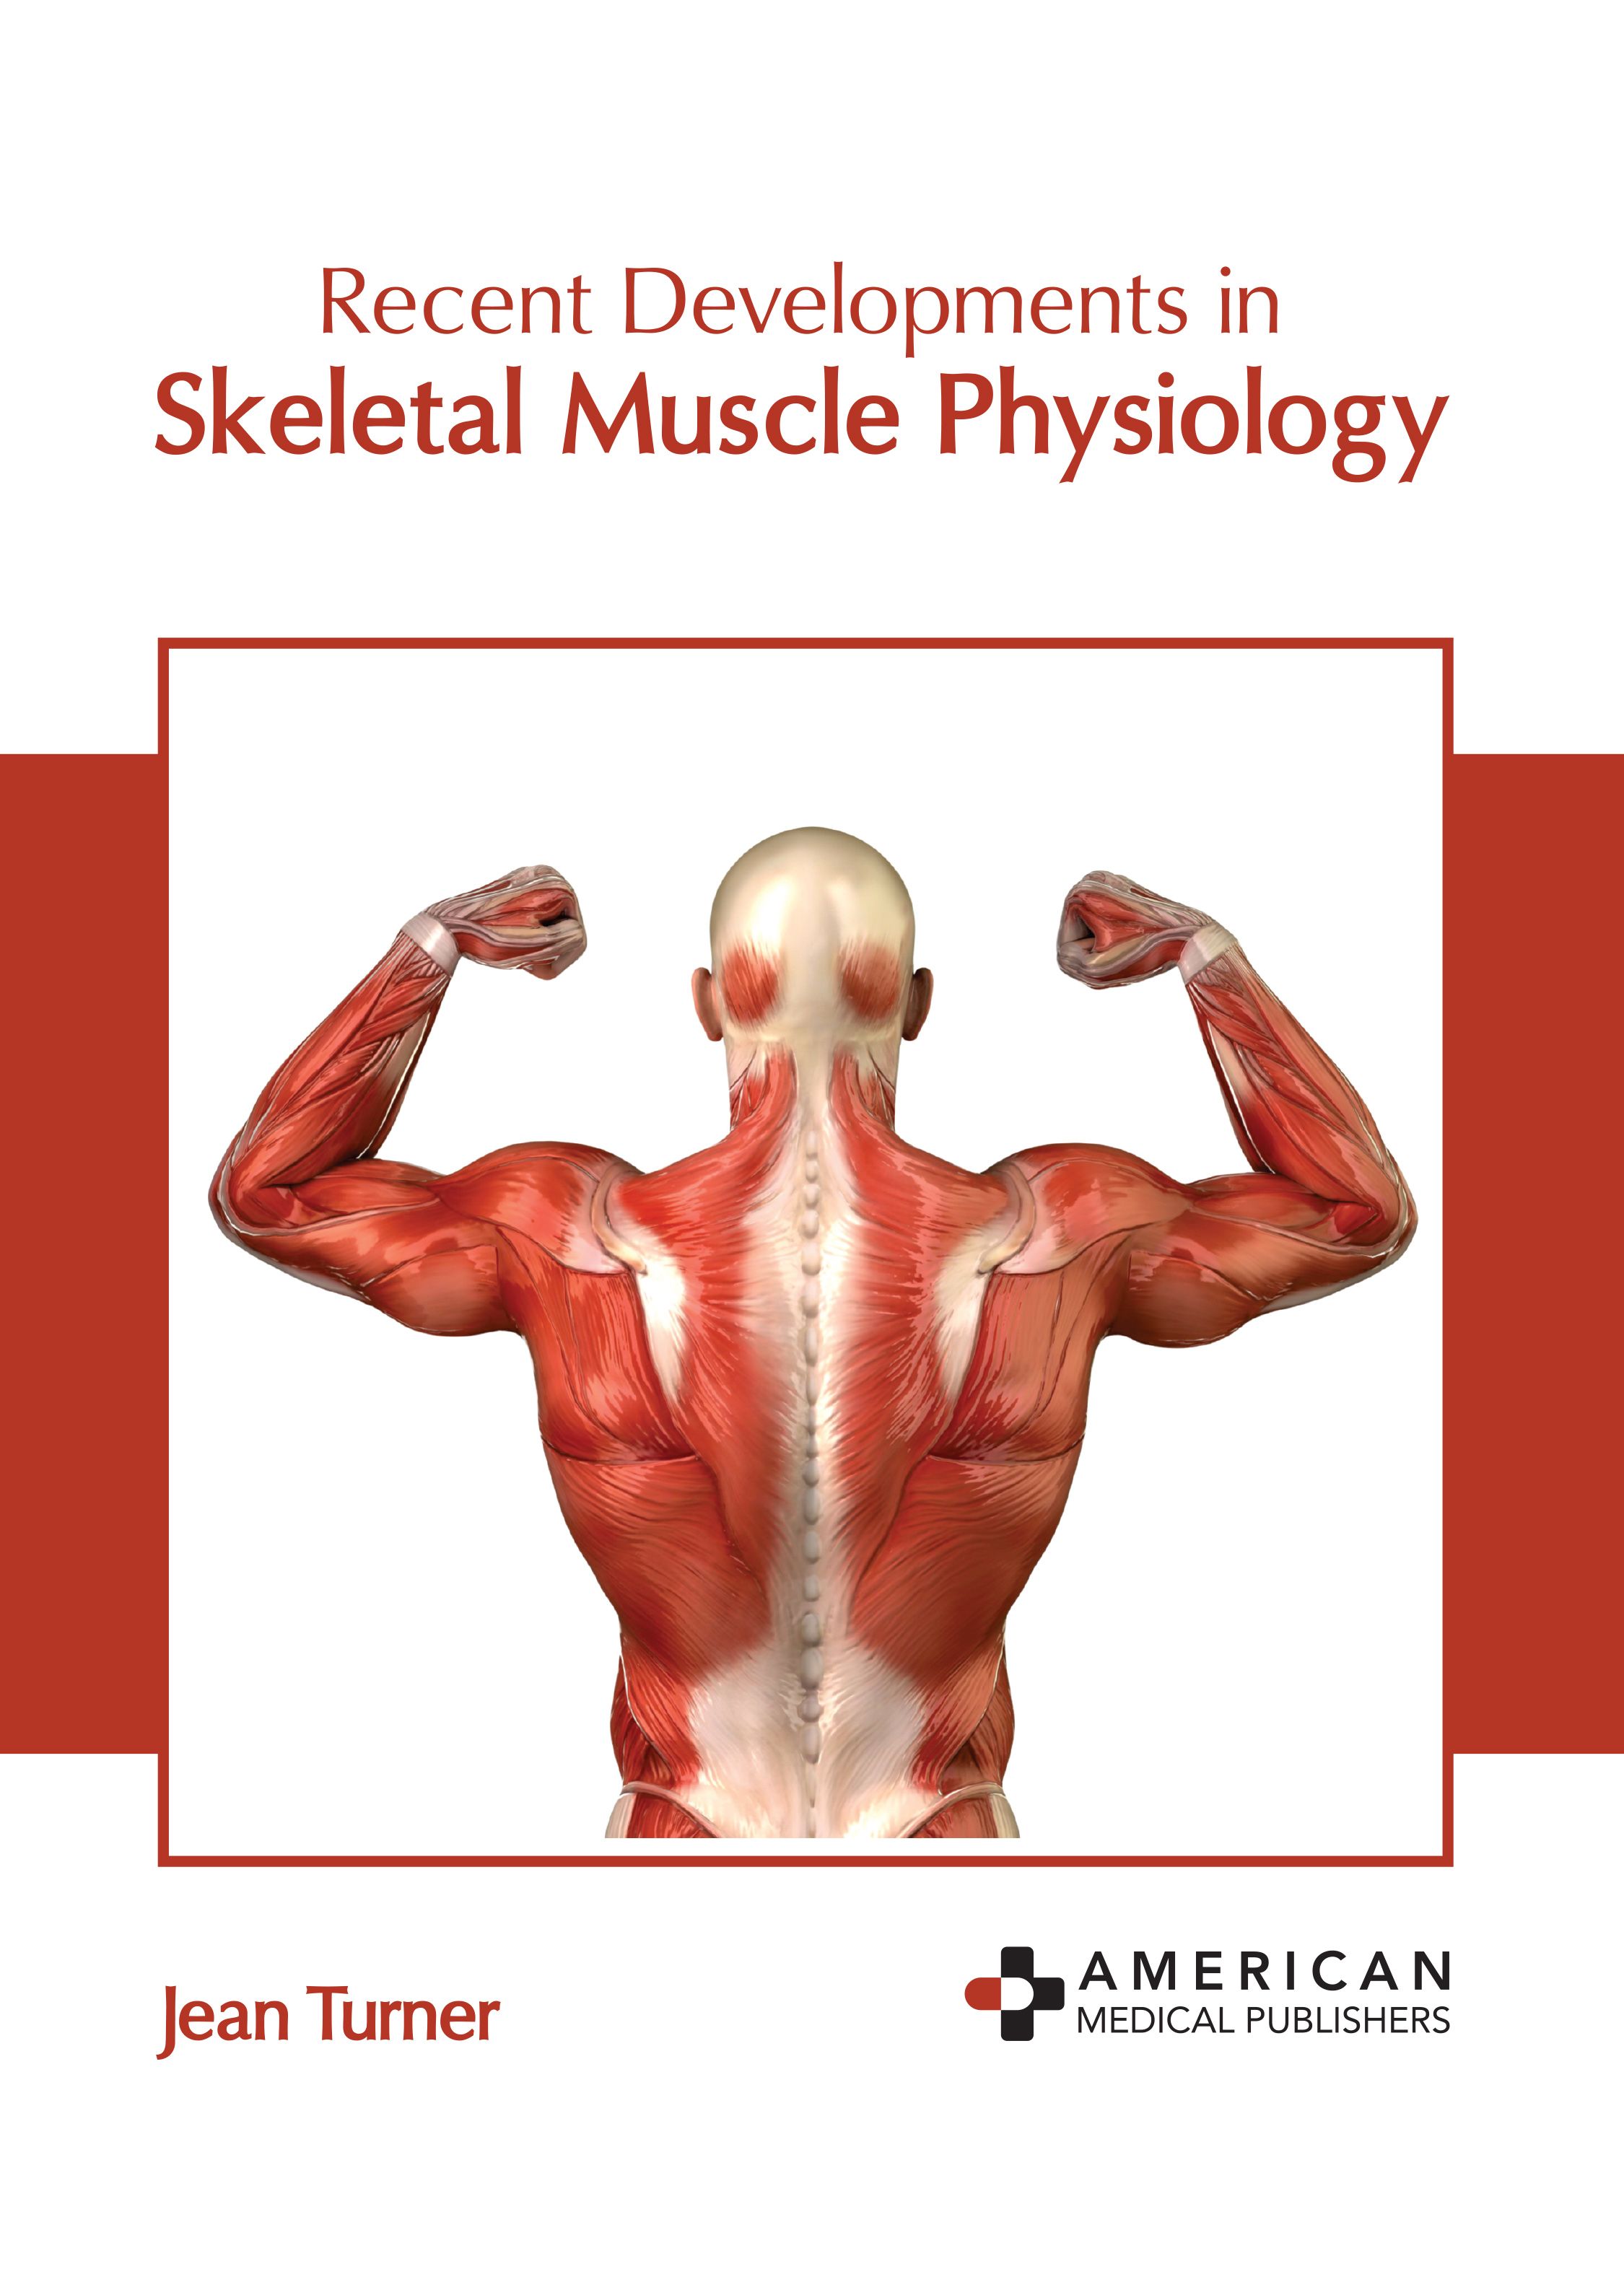 RECENT DEVELOPMENTS IN SKELETAL MUSCLE PHYSIOLOGY